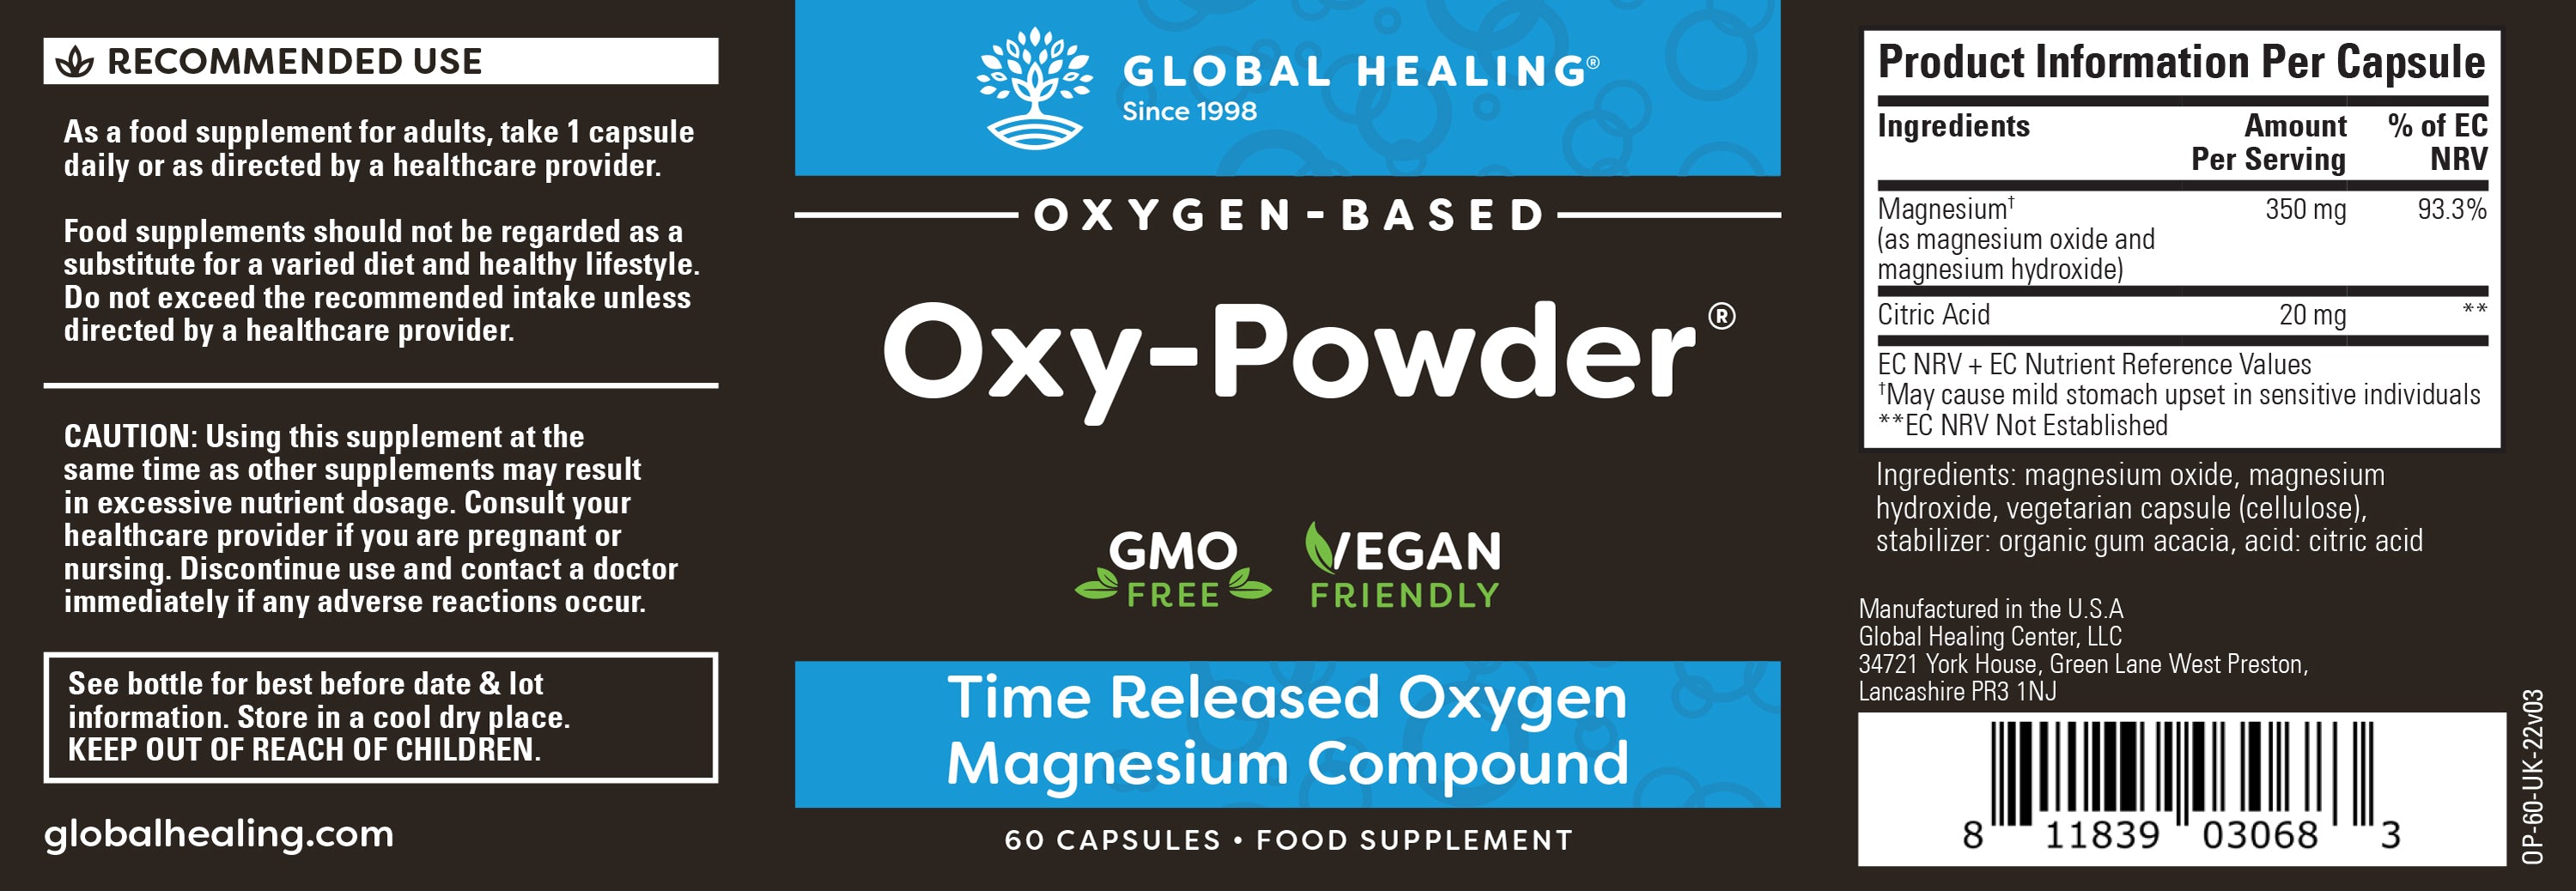 The Supplement facts for Oxy-powder, from the bottle label